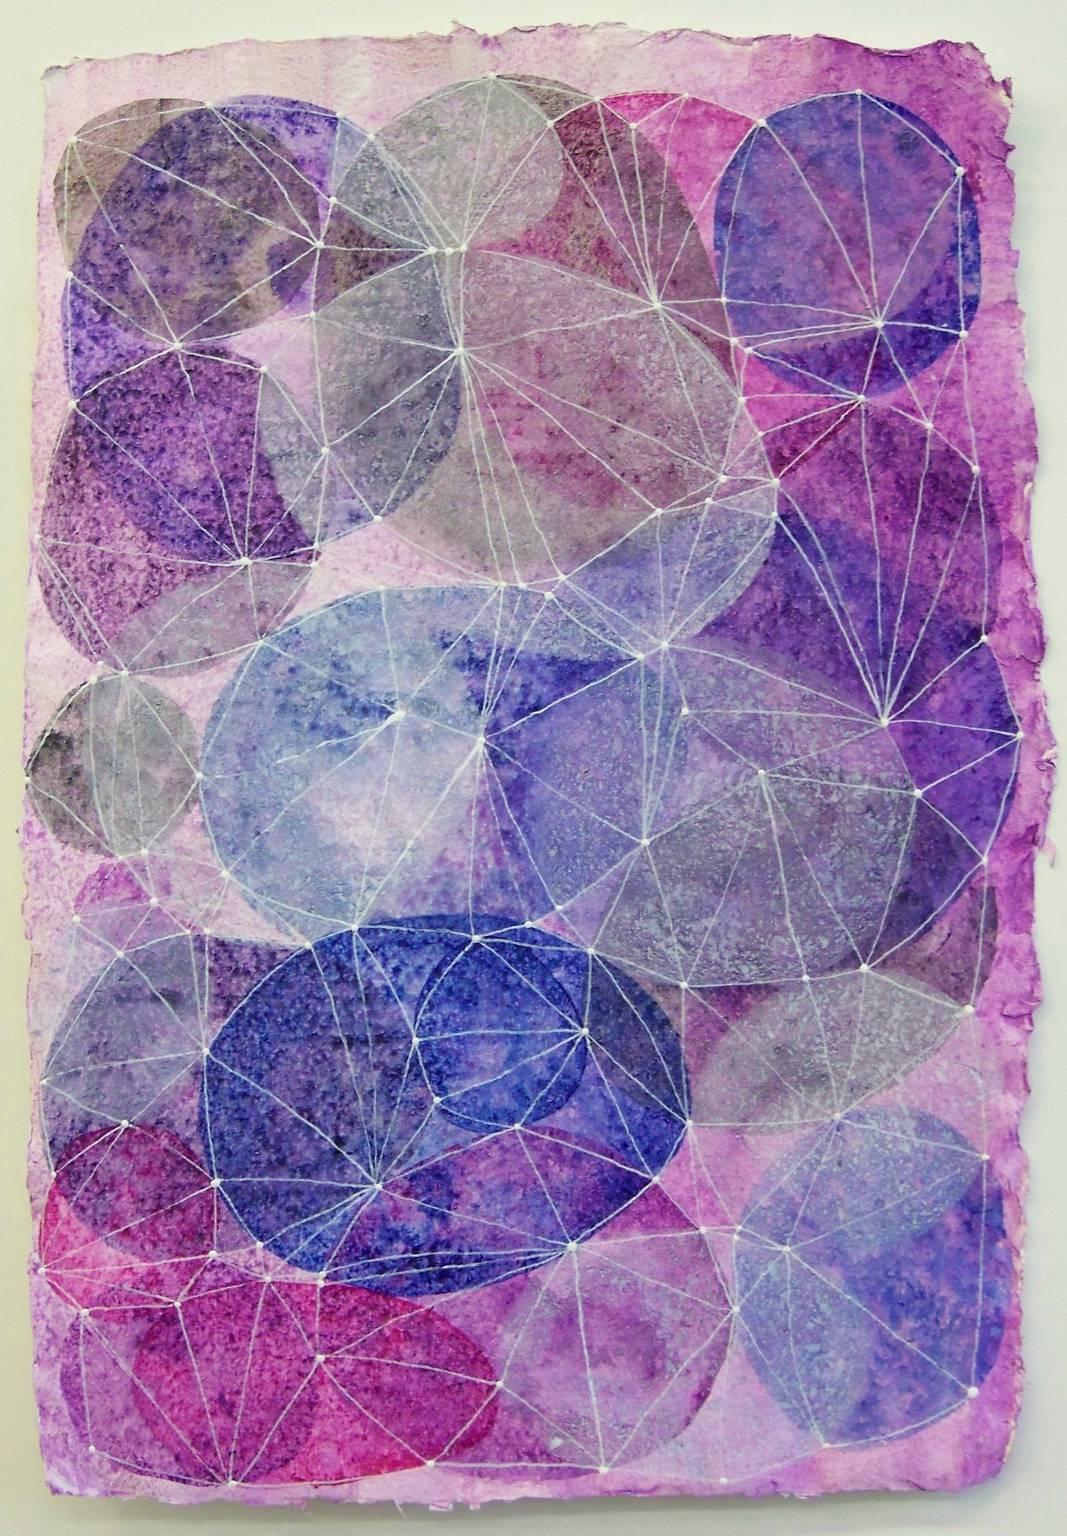 Denise Driscoll's "Inner Garden 16" is an 18 x 12 inch acrylic painting / drawing on handmade paper with a deckle edge. Transparent ovals in magenta, ultramarine blue, violet and white are overlaid with a drawn network of white dots and lines. The